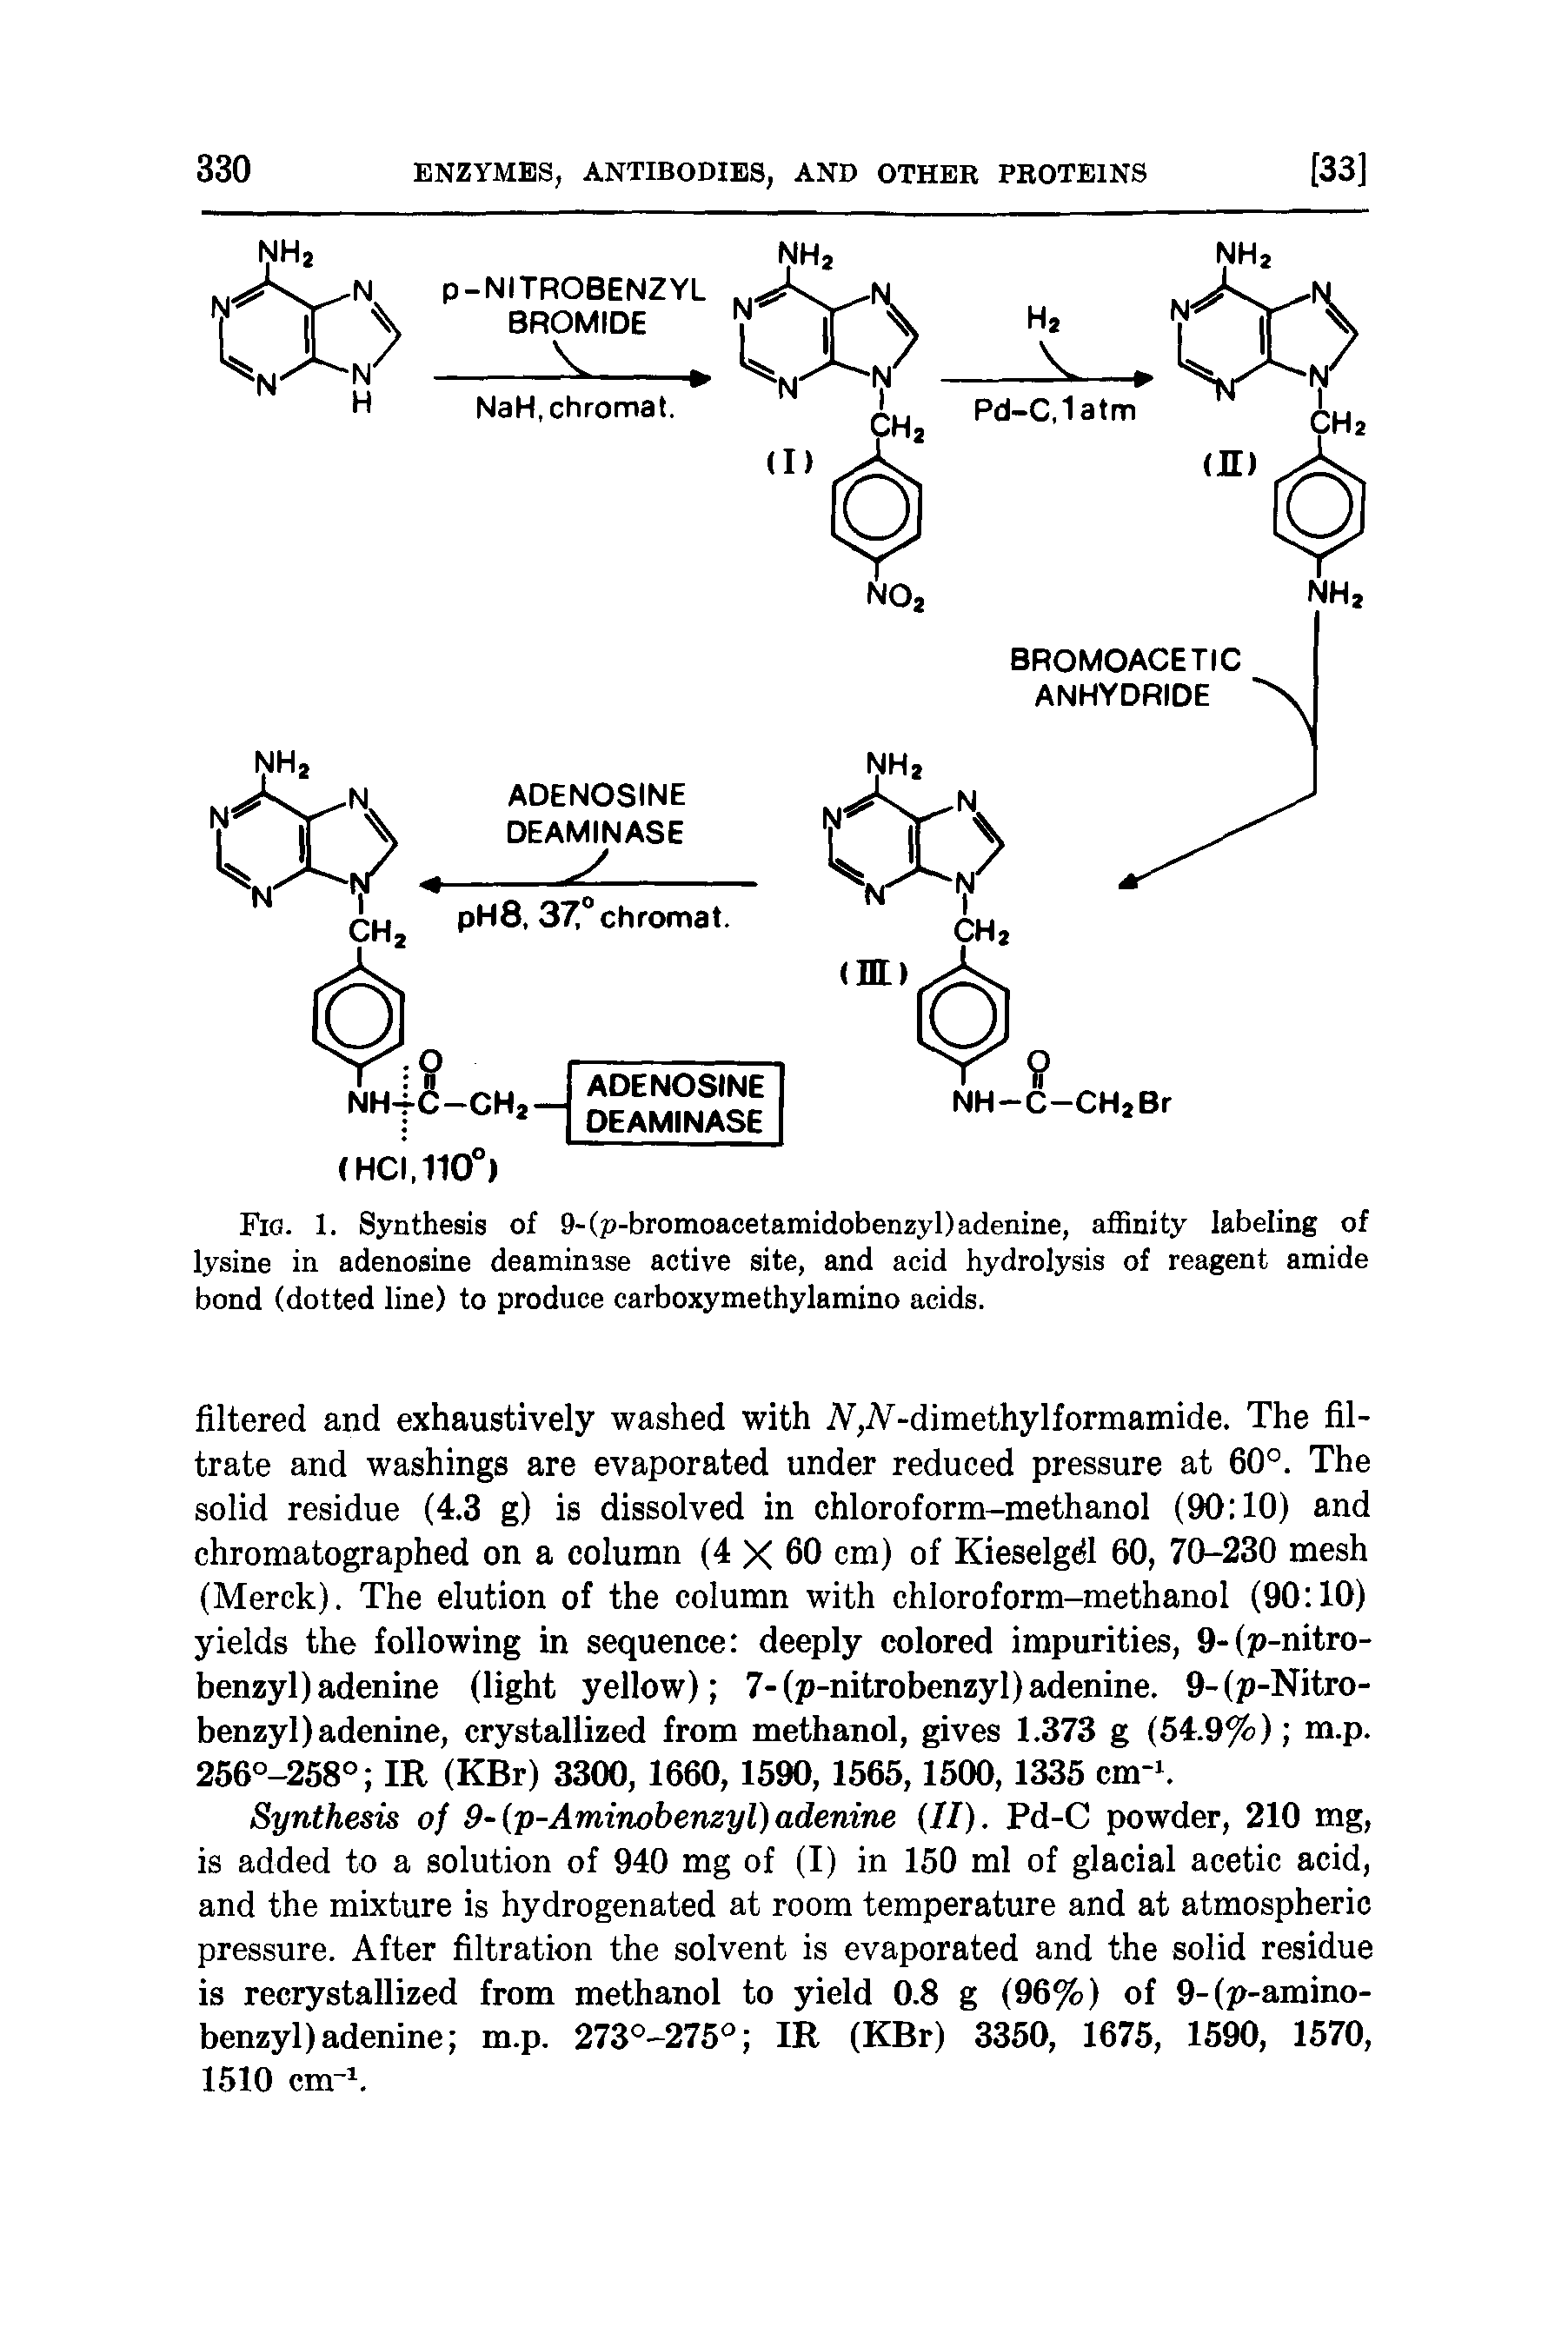 Fig. 1. Synthesis of 9-(p-bromoacetamidobenzyl)adenine, aflSnity labeling of lysine in adenosine deaminase active site, and acid hydrolysis of reagent amide bond (dotted line) to produce carboxymethylamino acids.